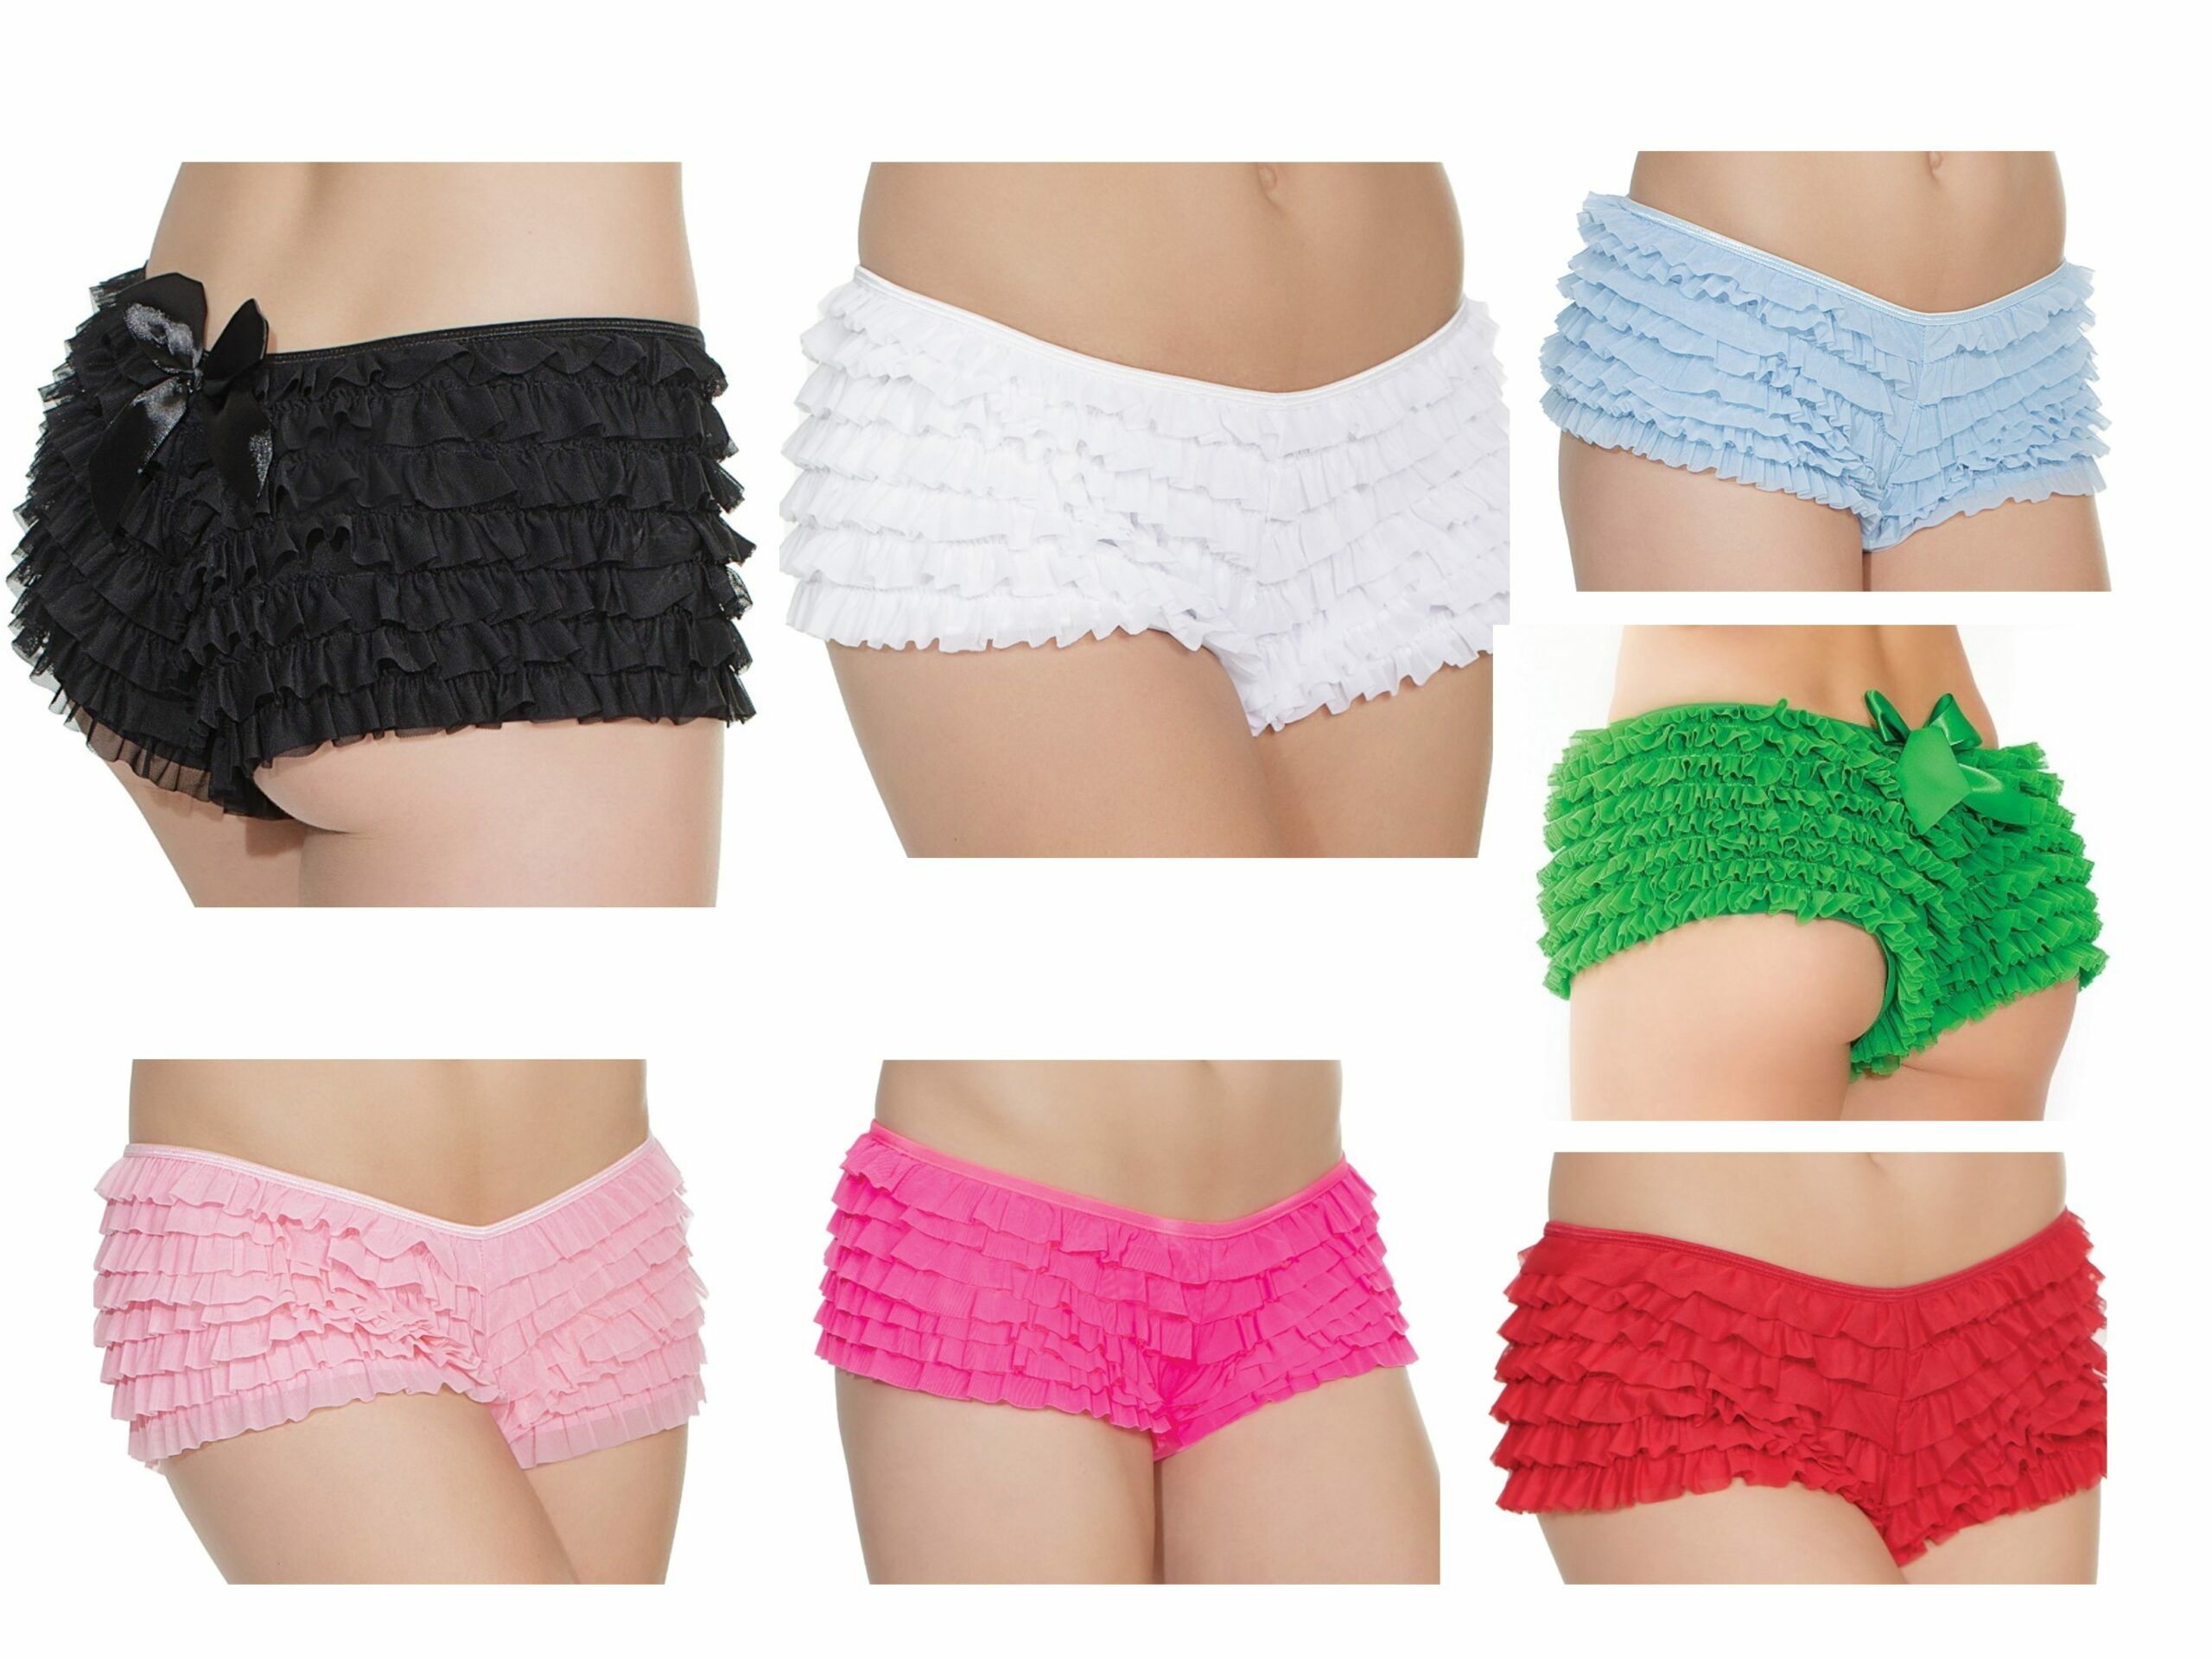 Ruffle Booty Shorts with Bow Burlesque Knickers